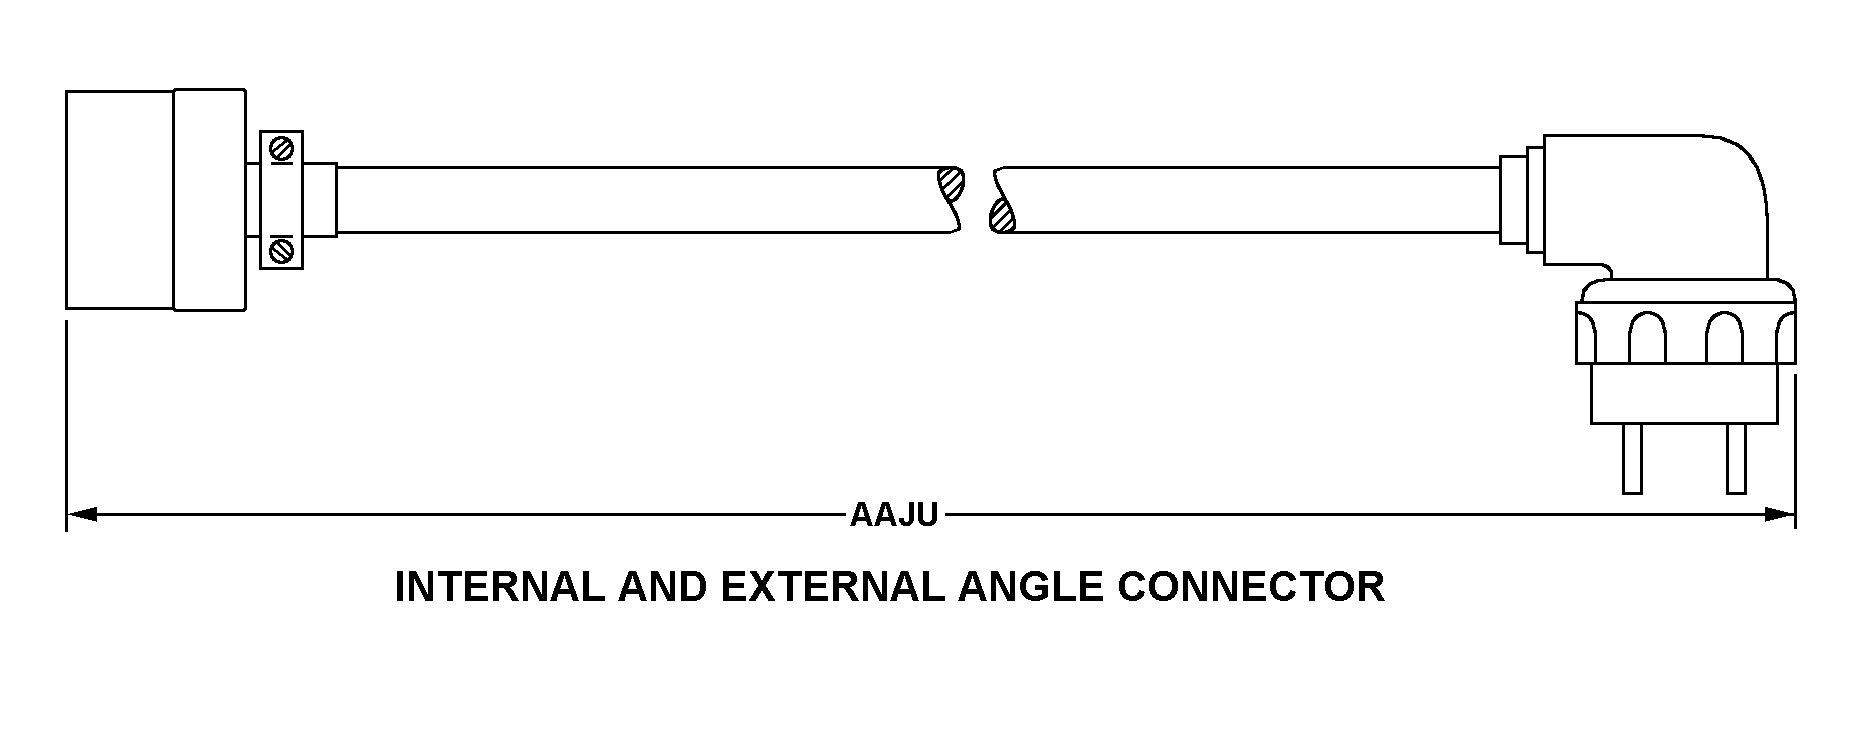 INTERNAL AND EXTERNAL ANGLE CONNECTOR style nsn 5995-01-321-9469